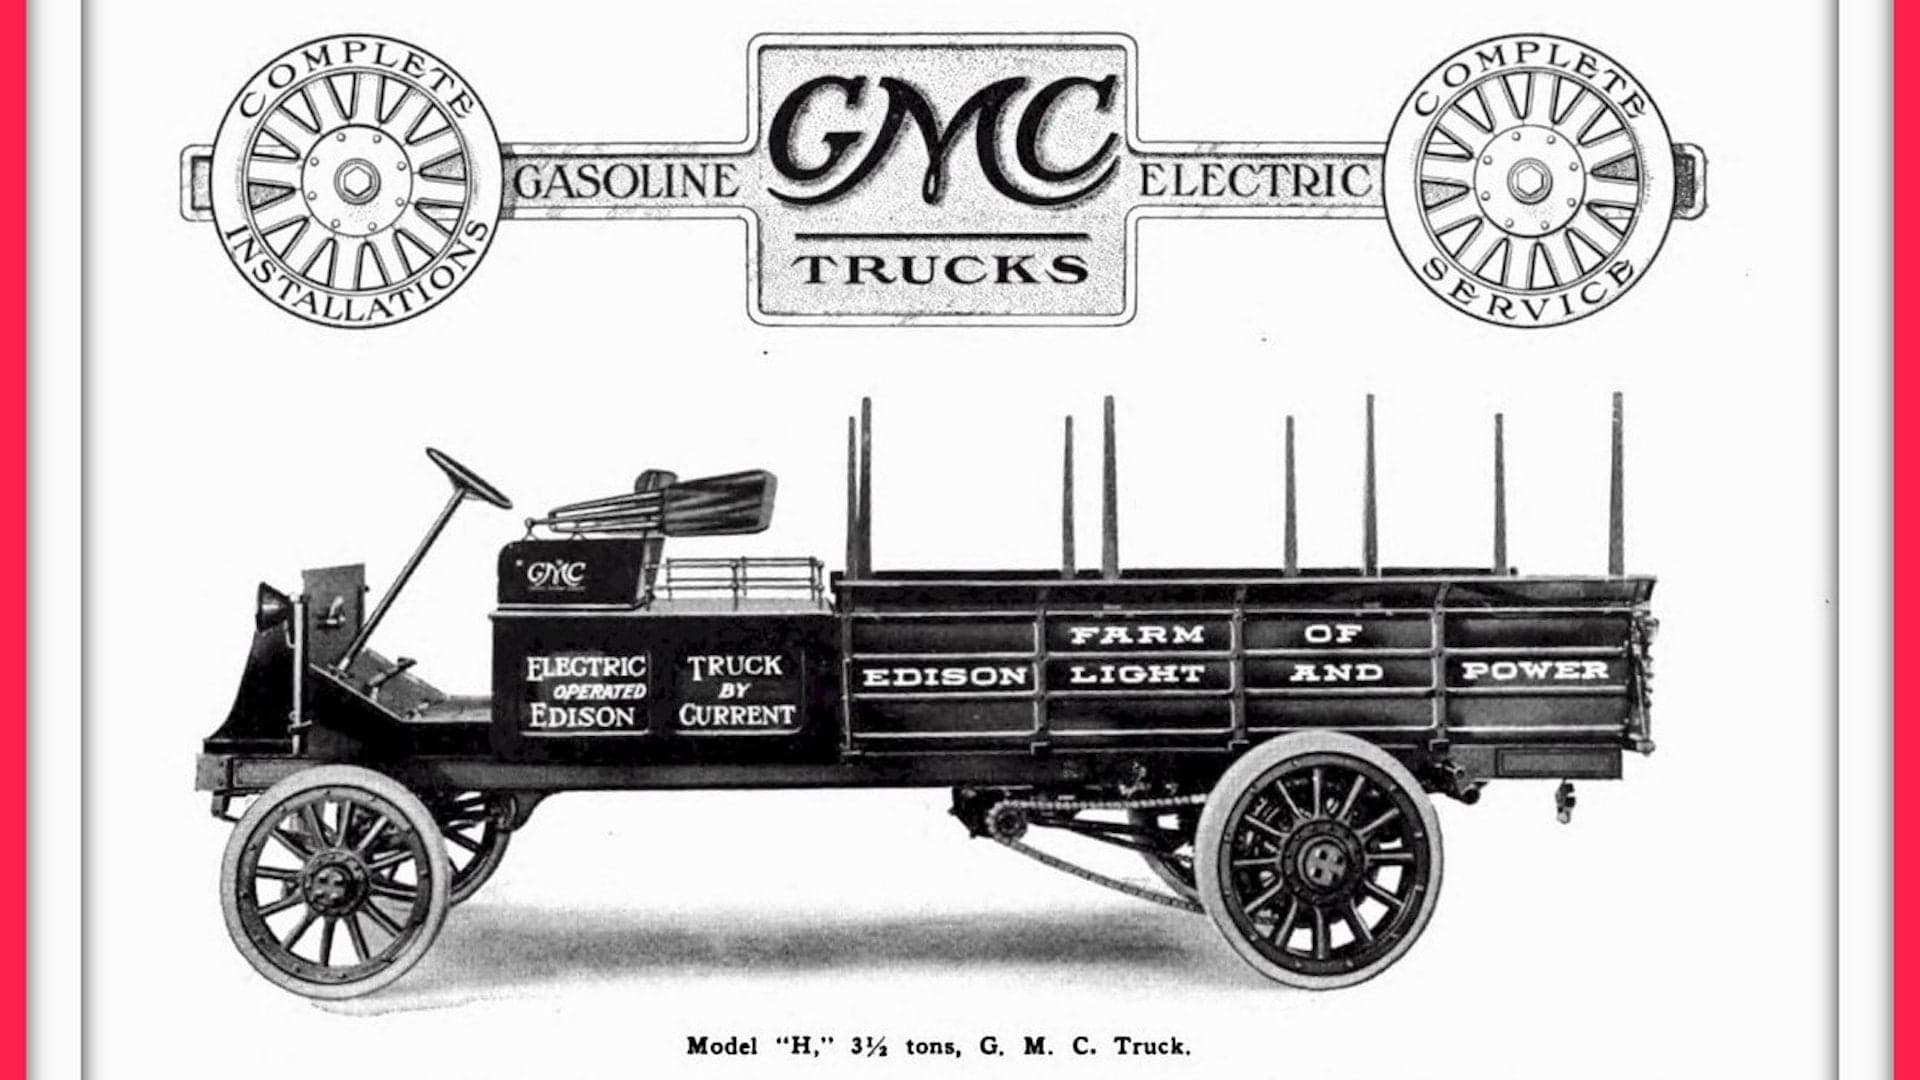 Forget the Hummer EV: GMC Made an Electric Truck in 1913 Called the Model 3